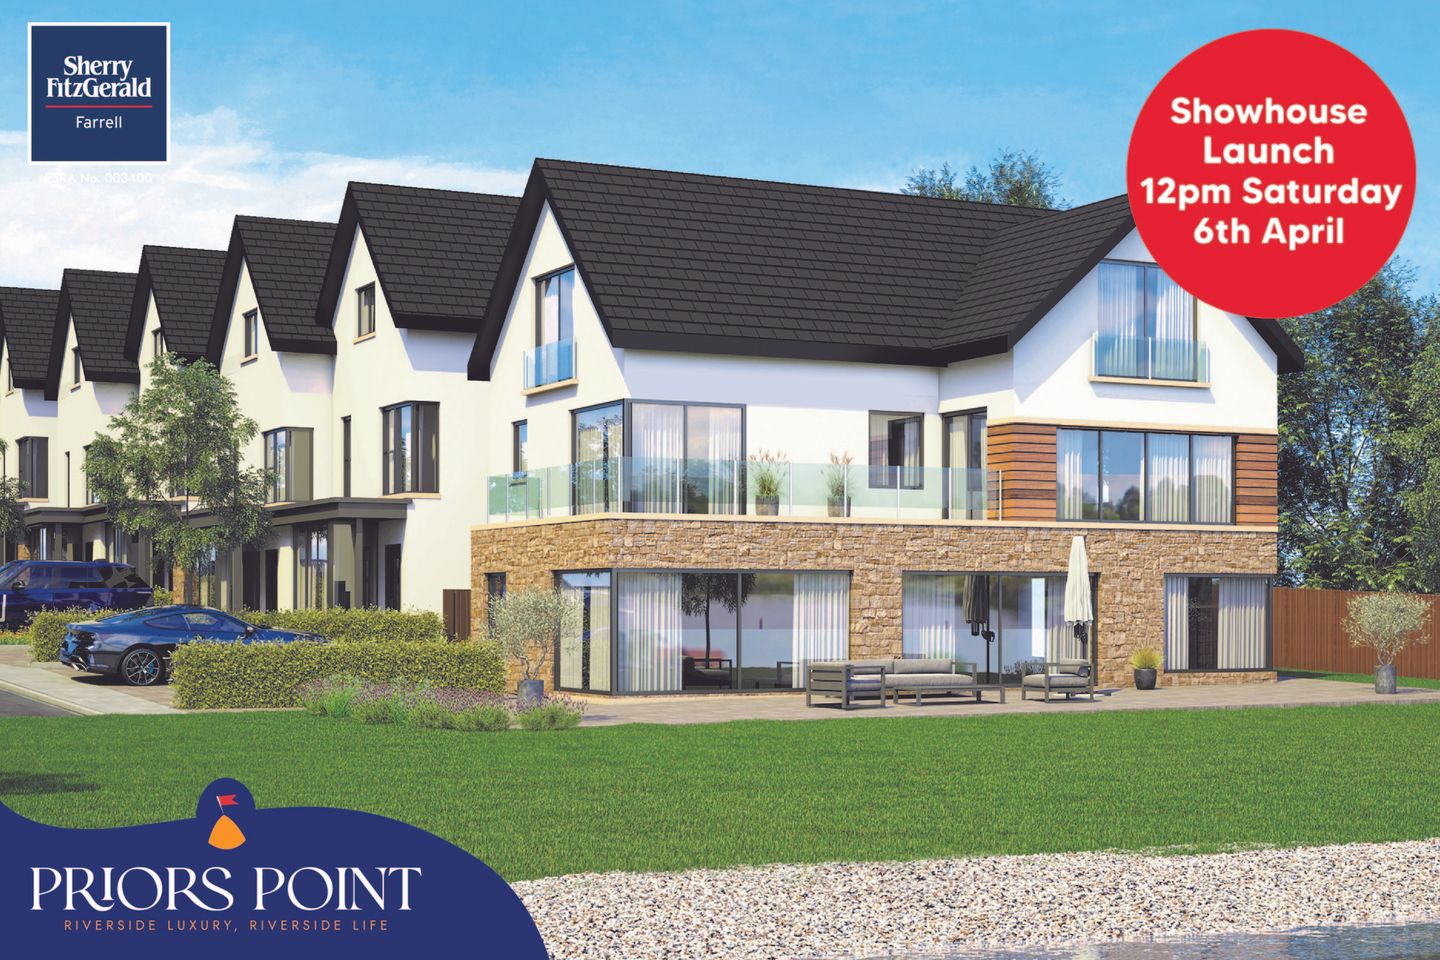 Type A1 - 4 Units Remaining, Priors Point, Priors Point, Attirory, Carrick-on-Shannon, Co. Leitrim